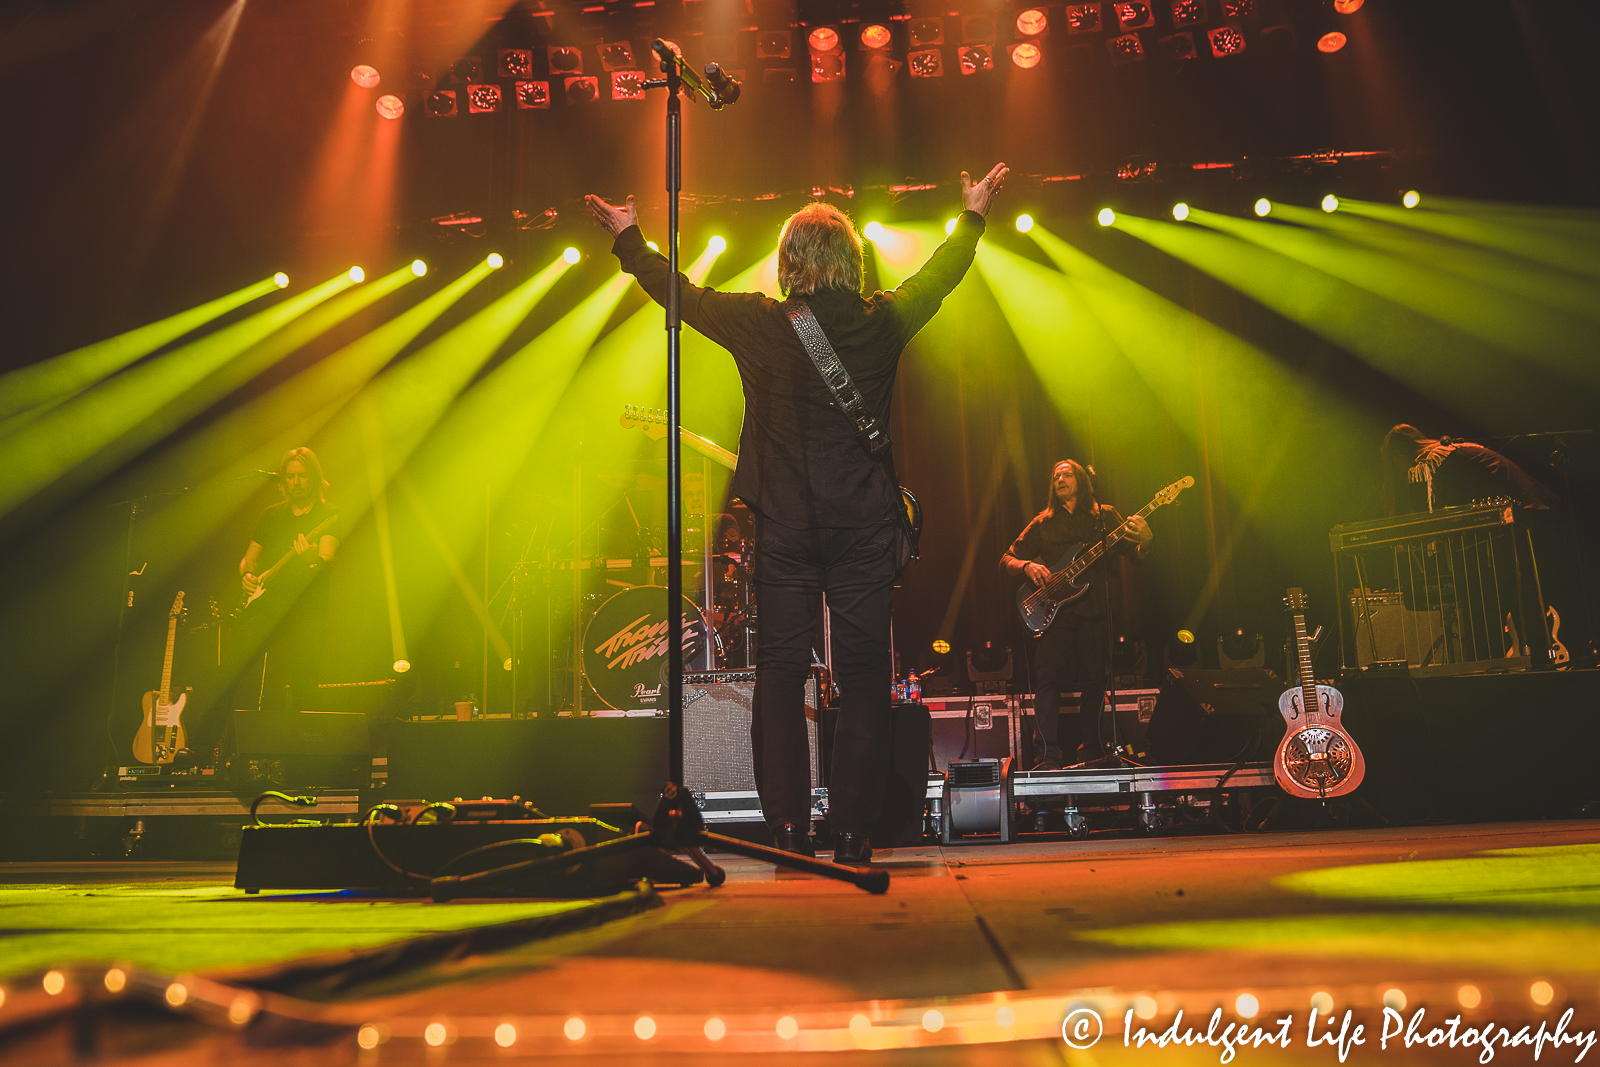 Travis Tritt brining down the lights as the band wrapped up "Move It On Over" live at Ameristar Casino Hotel Kansas City on December 3, 2021.